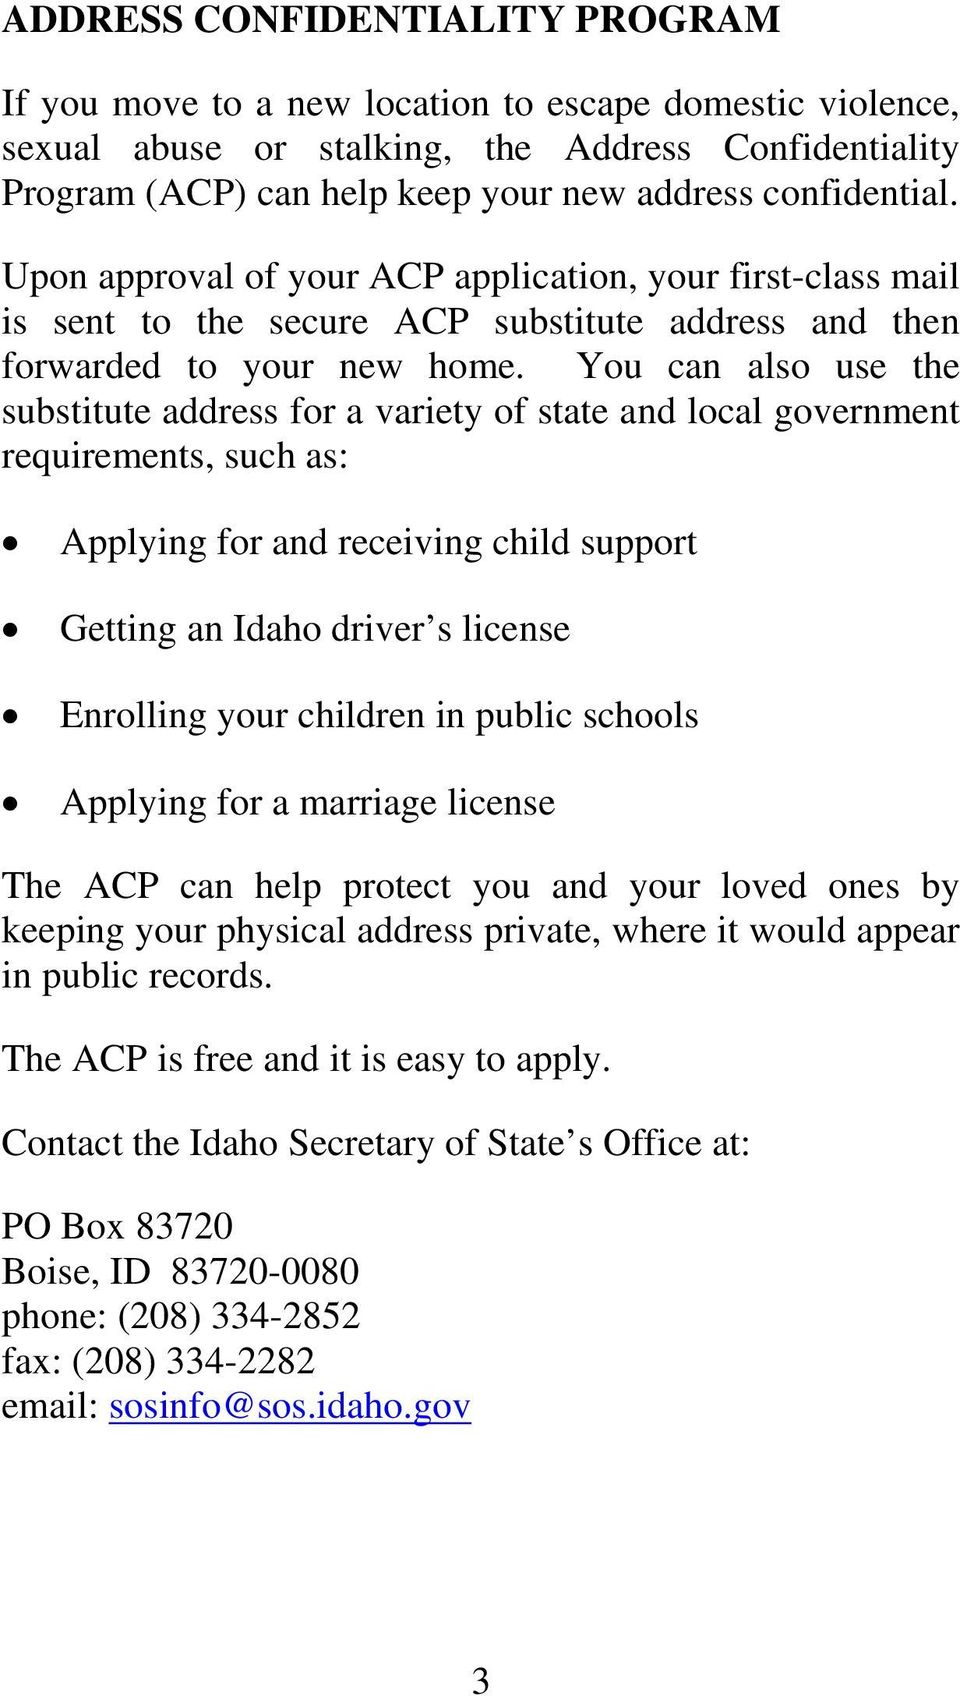 You can also use the substitute address for a variety of state and local government requirements, such as: Applying for and receiving child support Getting an Idaho driver s license Enrolling your